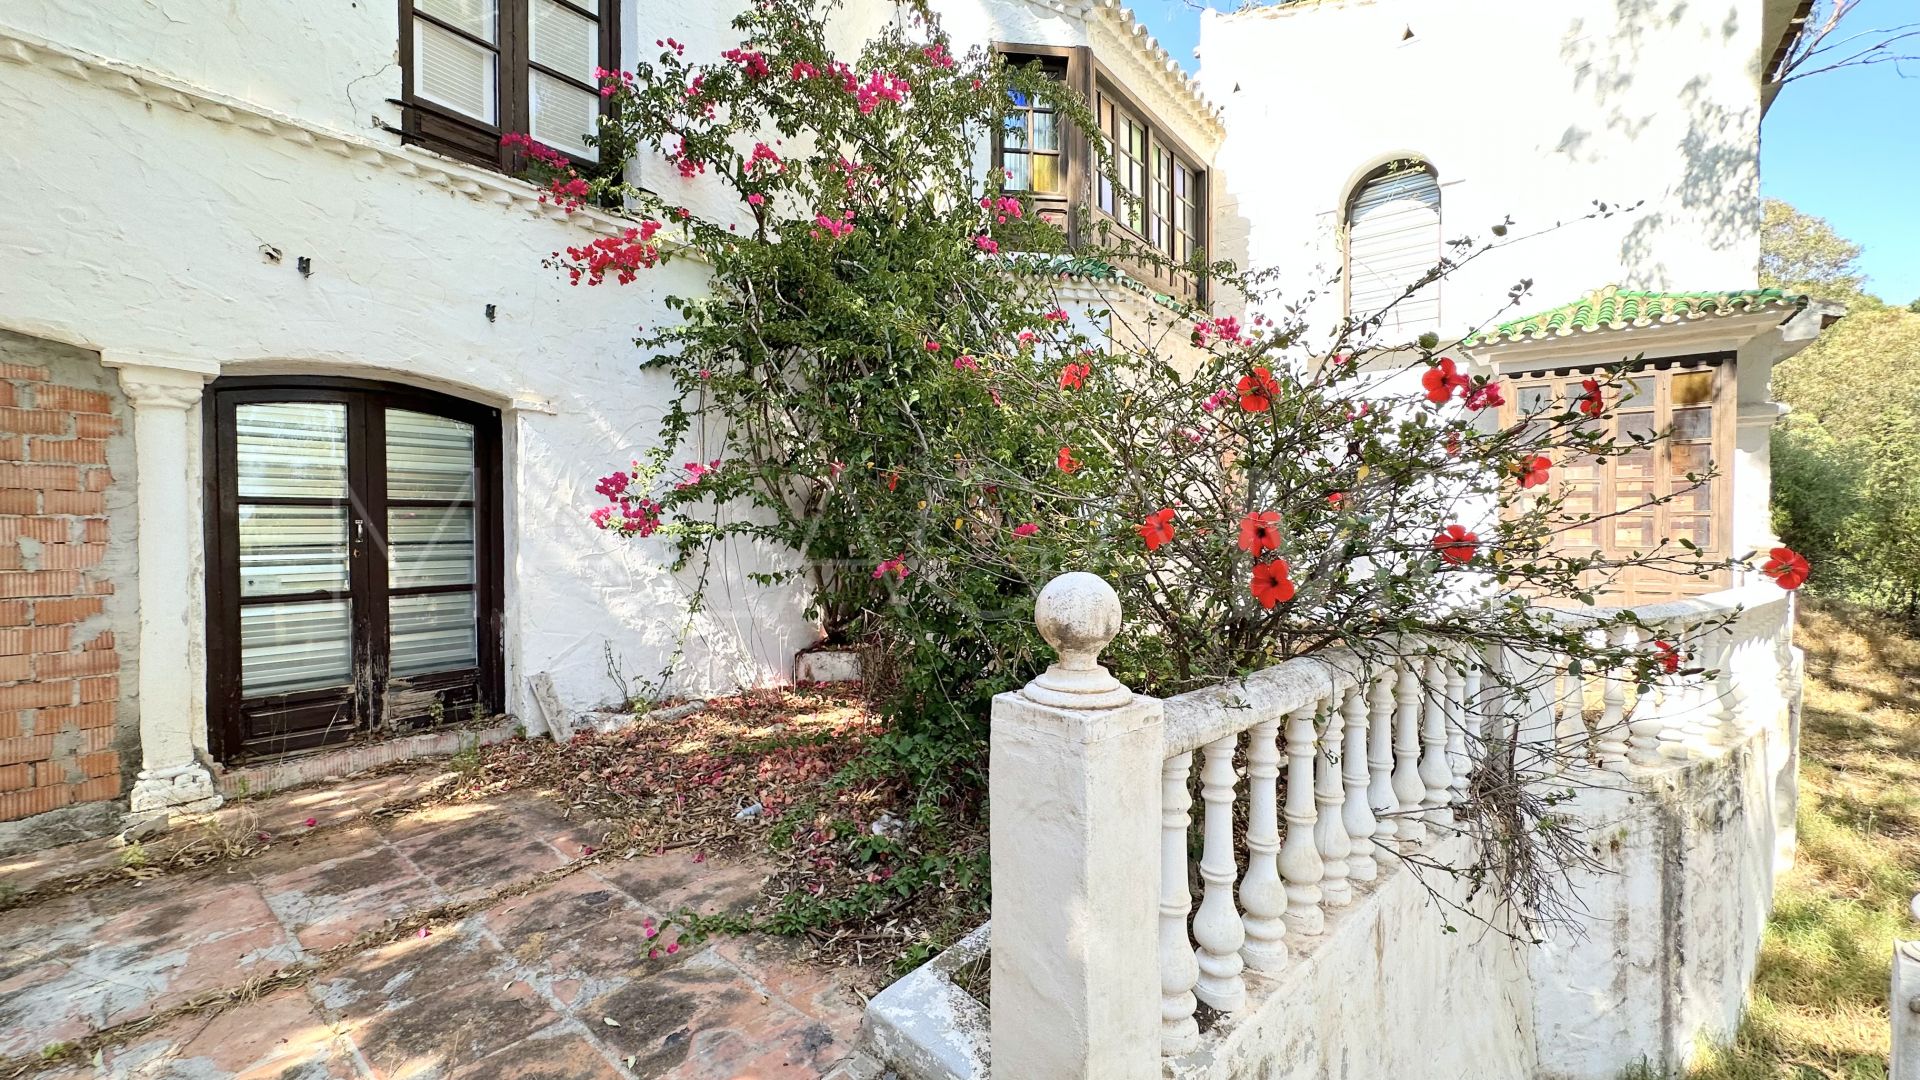 For sale house with 14 bedrooms in Valtocado